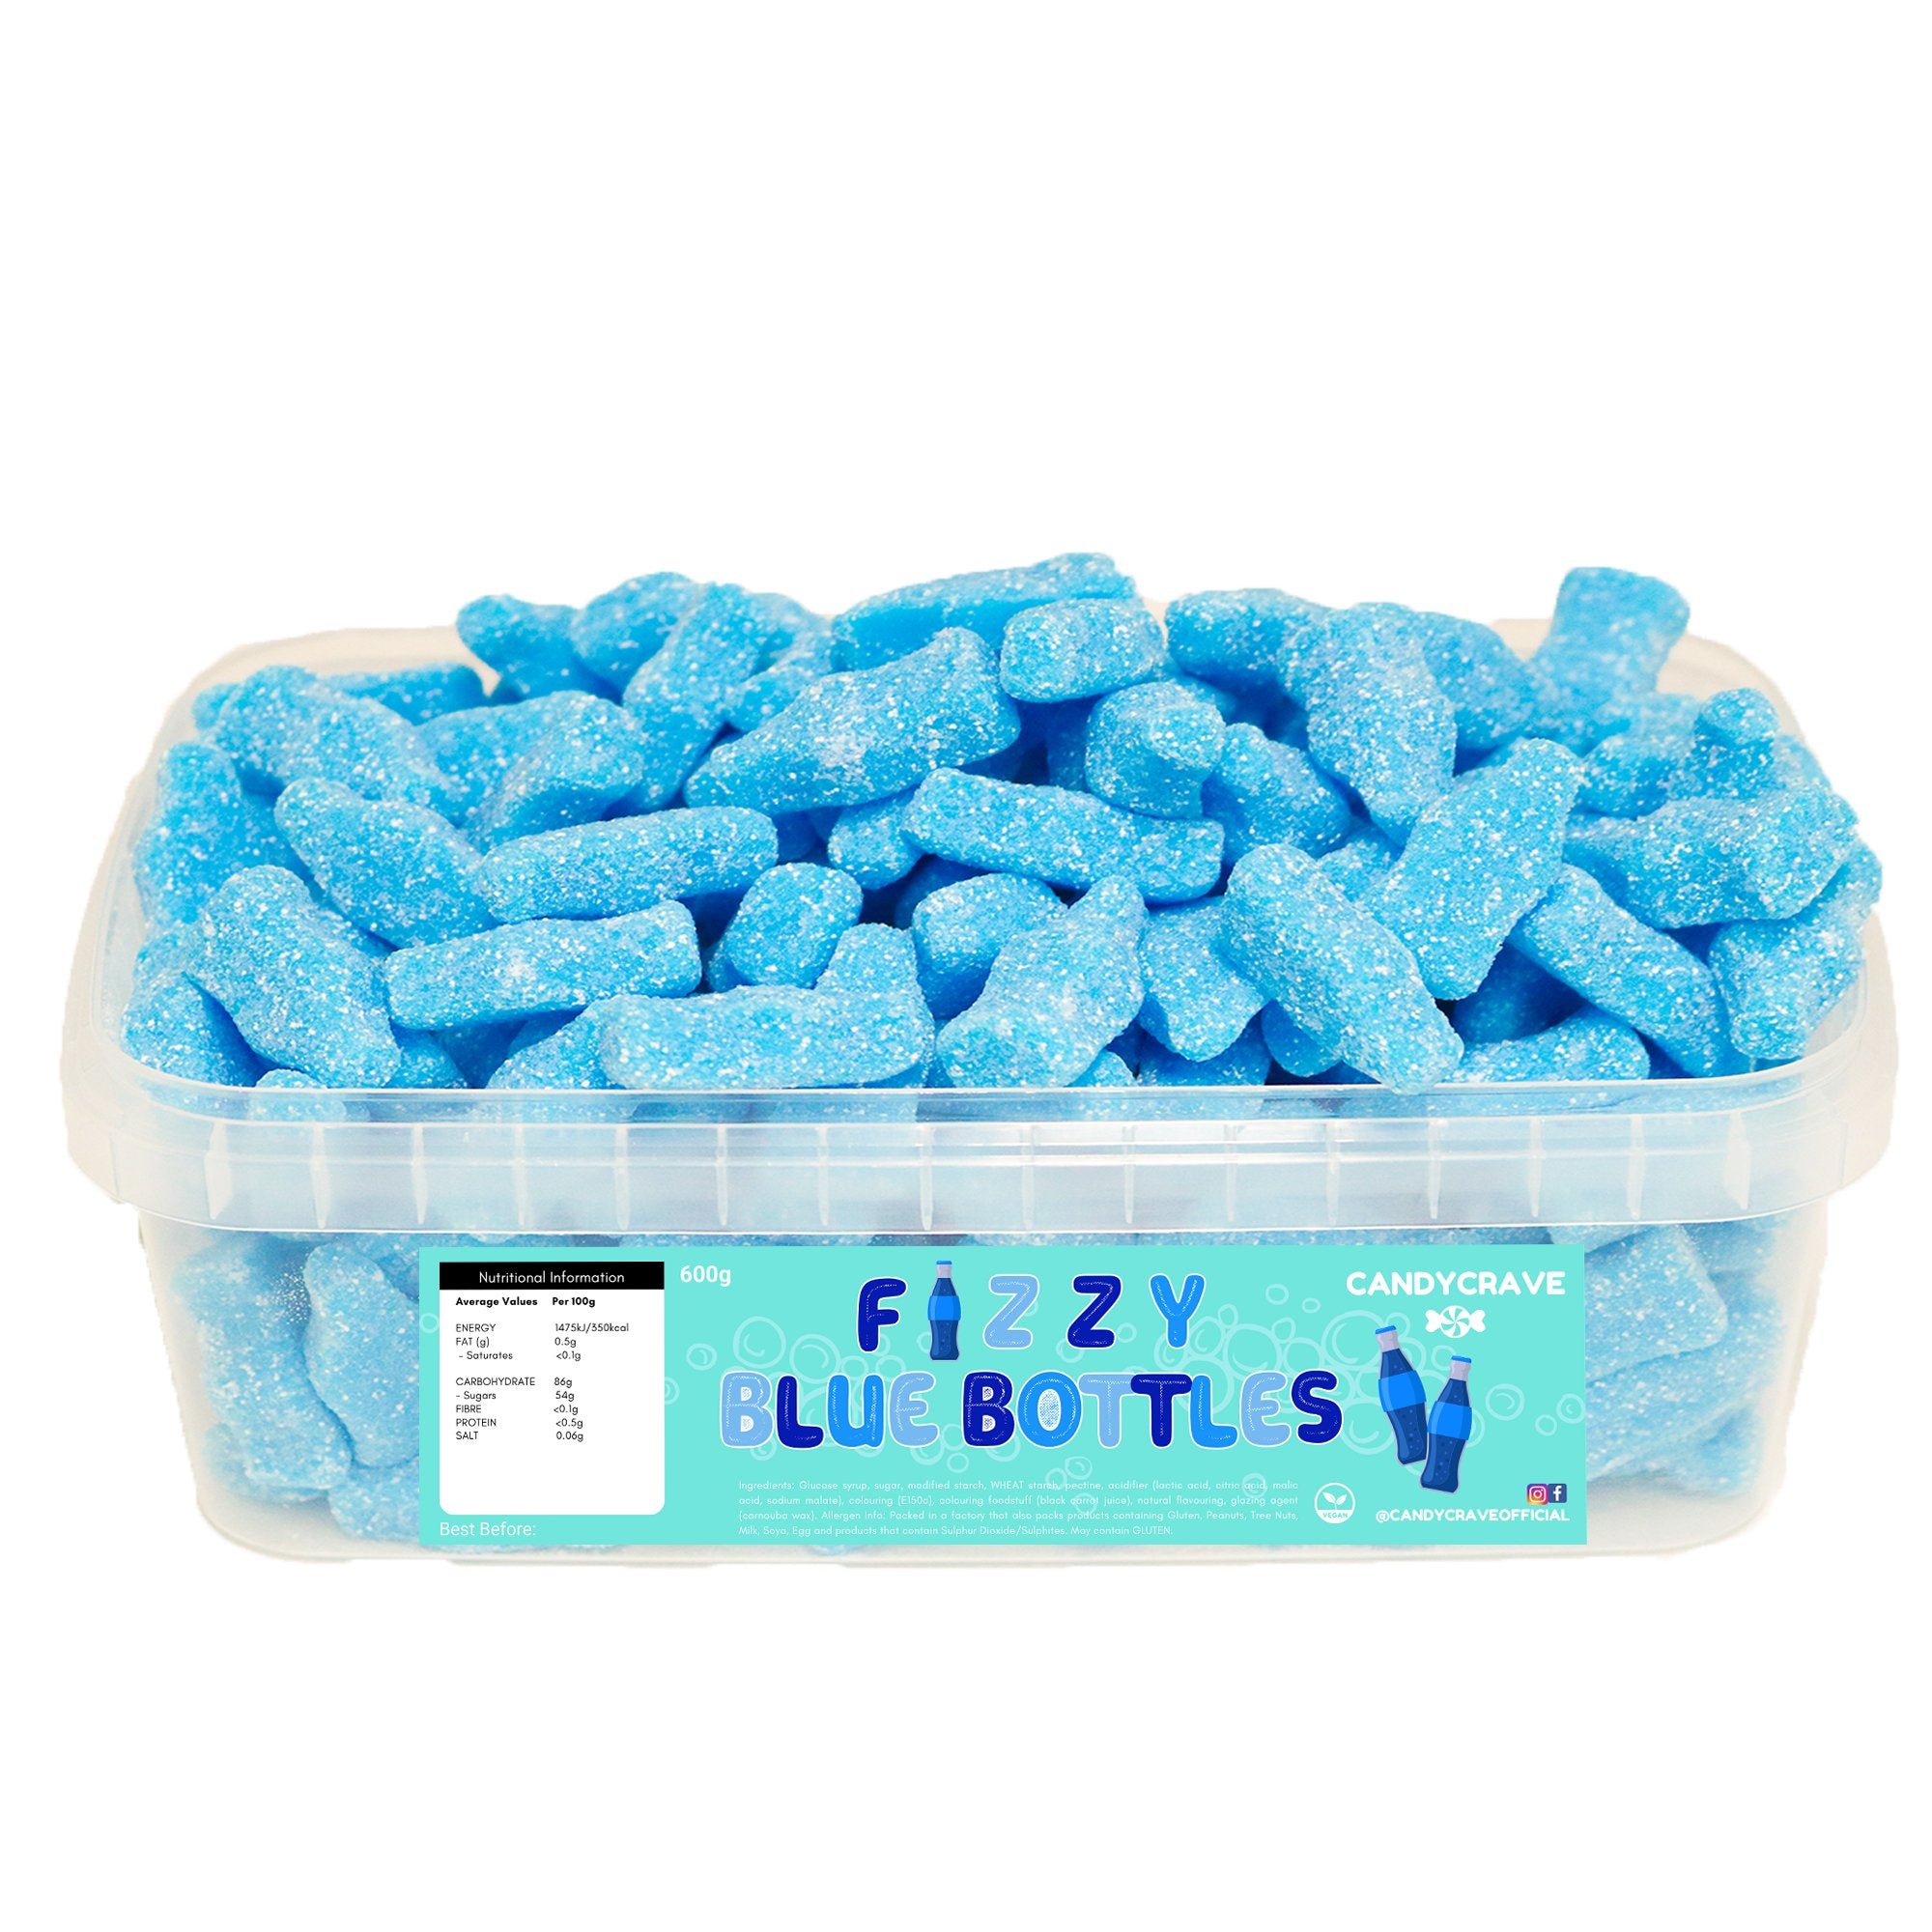 Candy Crave Fizzy Blue Bottles Tub 600g - Jessica's Sweets